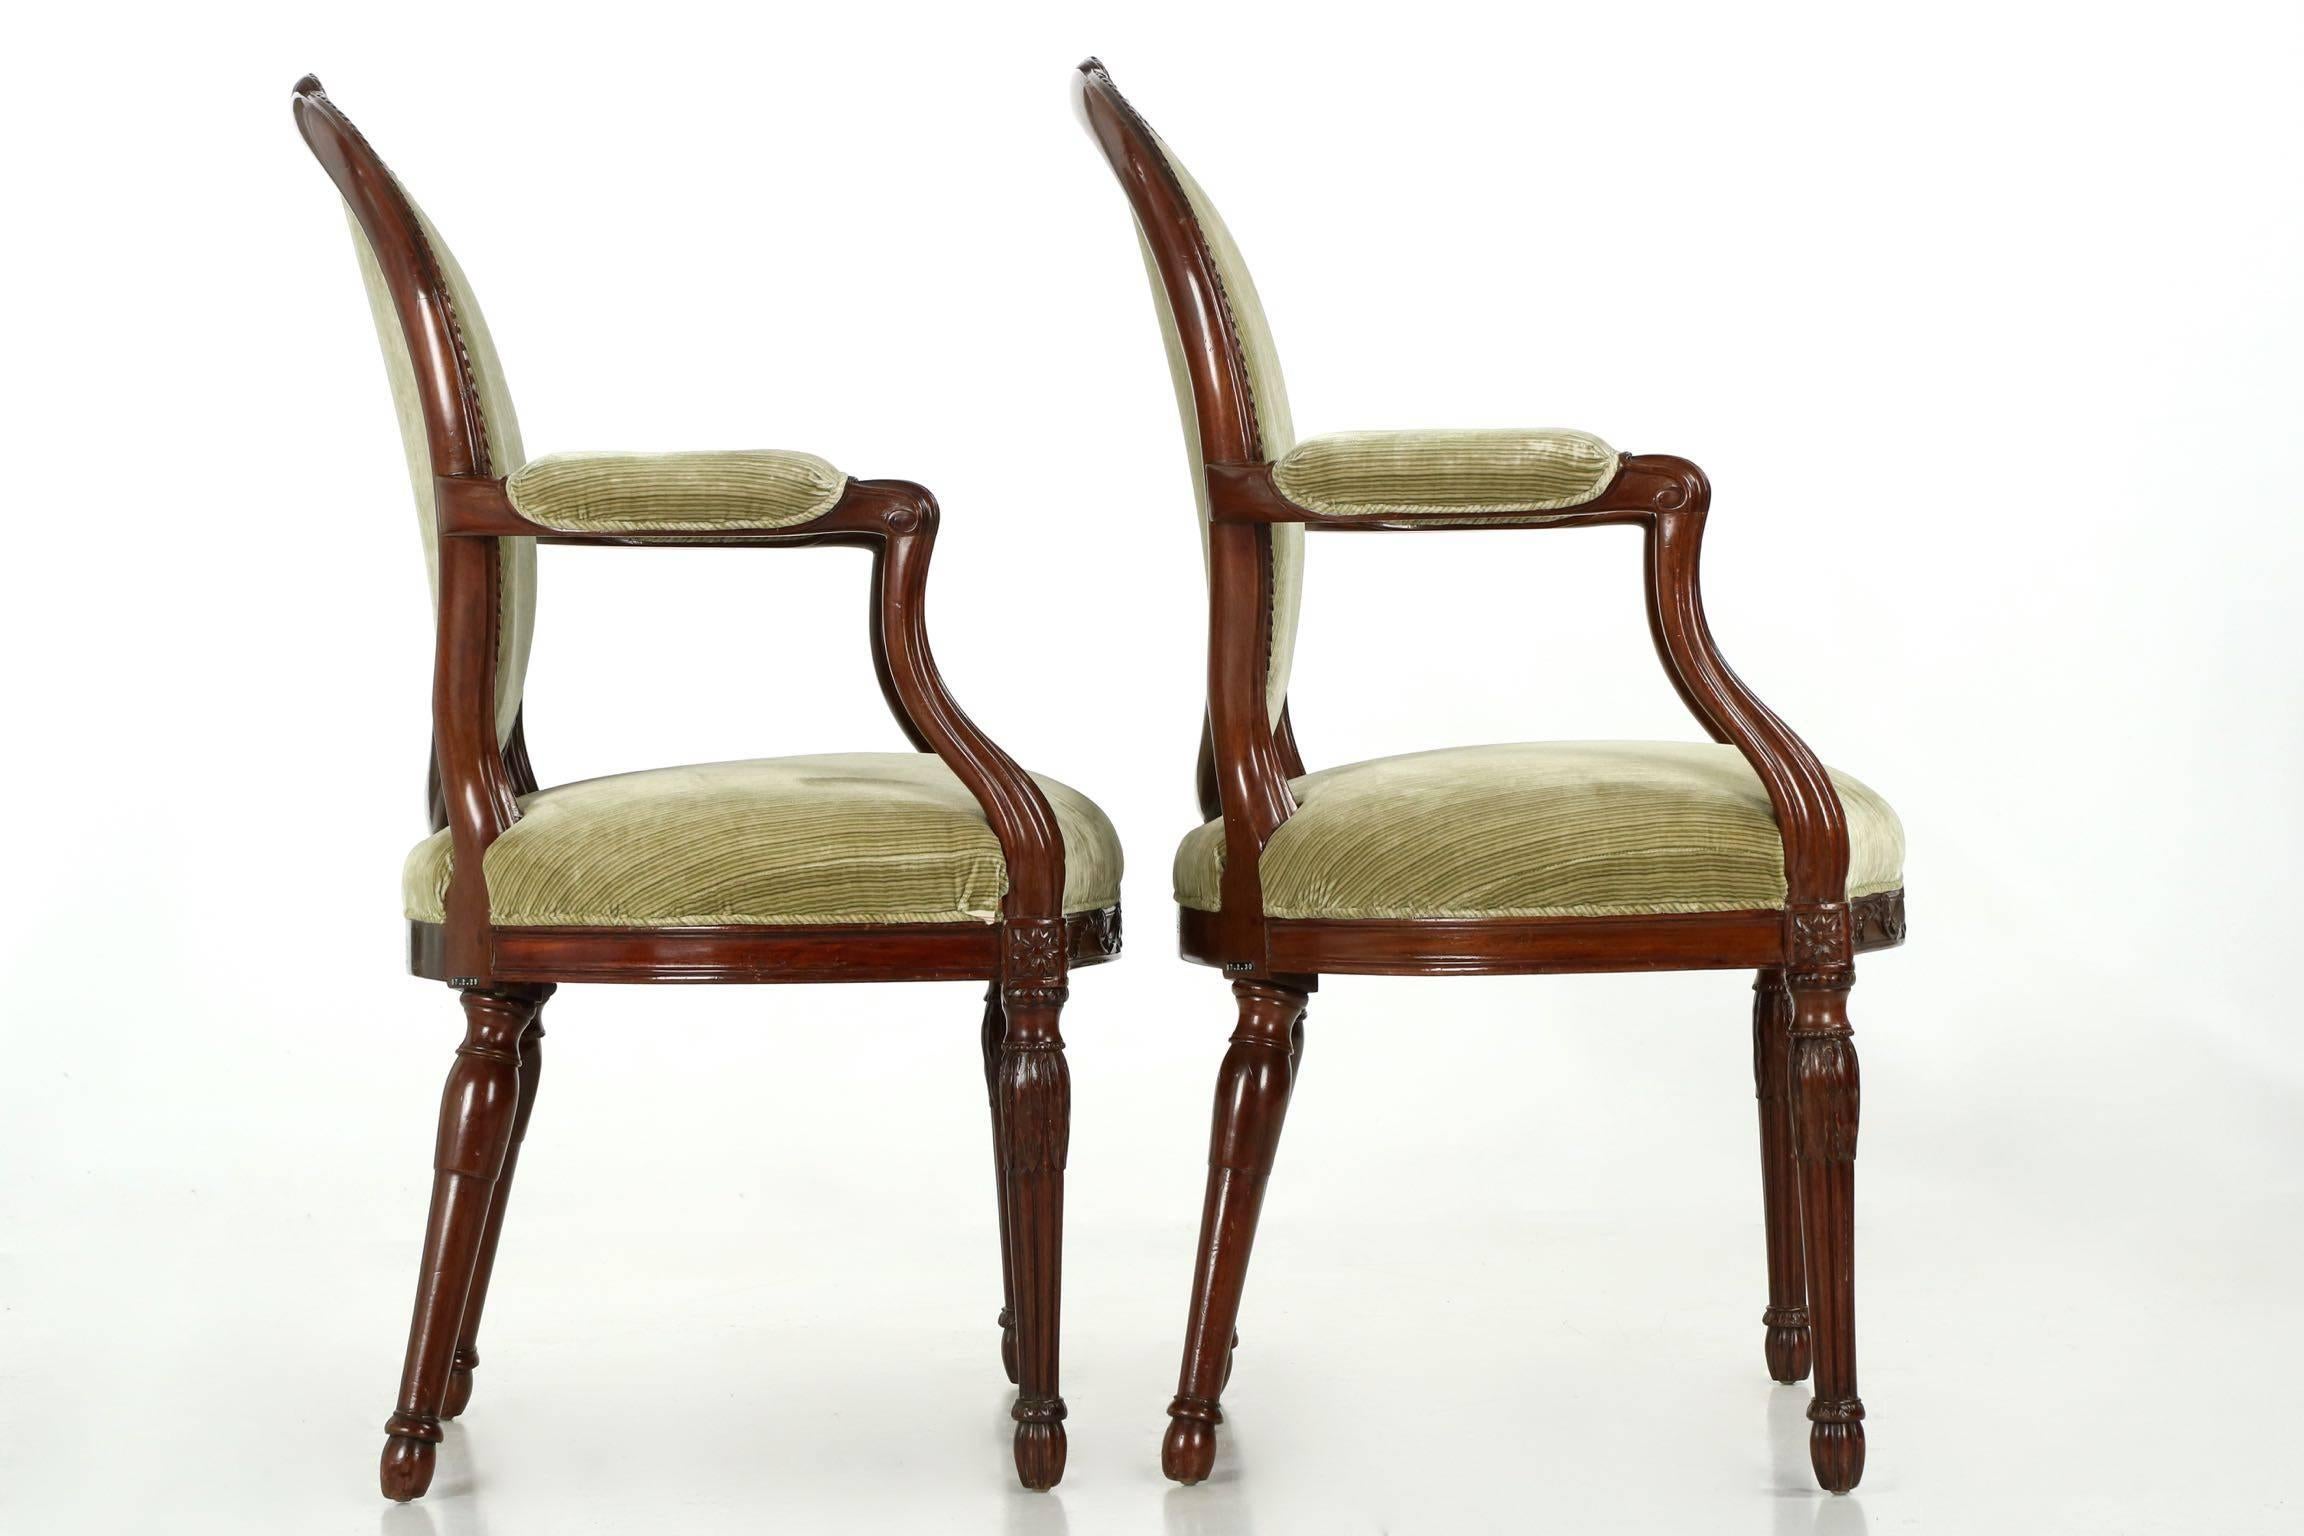 Each with exceedingly well carved surfaces and professionally conserved solid mahogany frames, this pair of George III period fauteuils exude a strength and sense of balance in form that is most striking. The design perfectly balances the angular